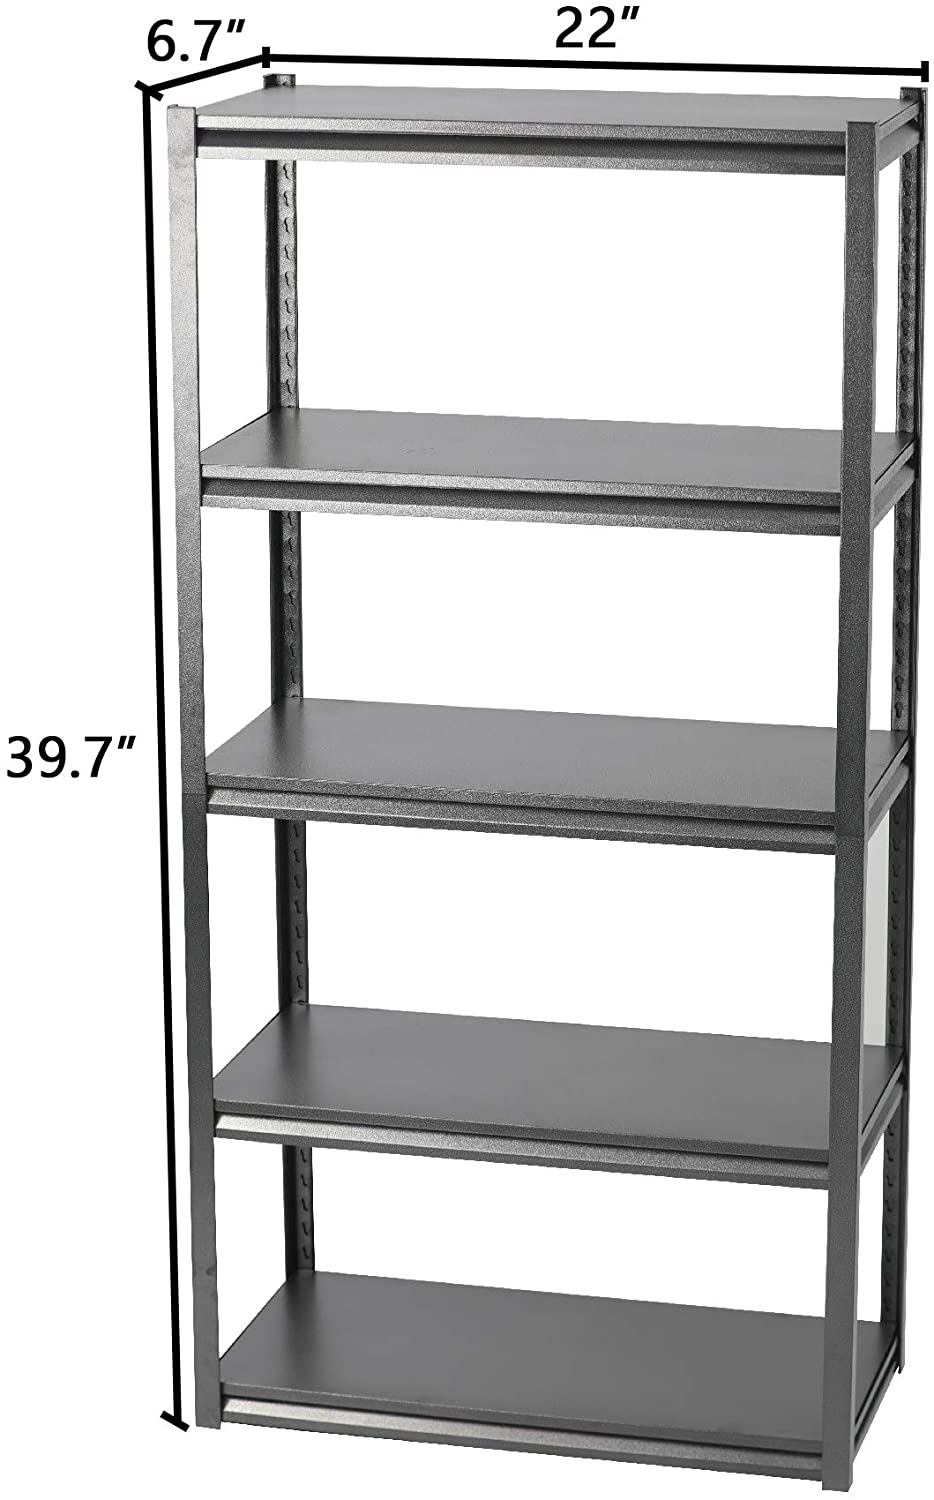 4 Tiers Adjustable Storage Shelf Rack Side End Table Modern Style Bookcase Display Stand and Storage Tower,Black,39.7” x 22” x6.7”